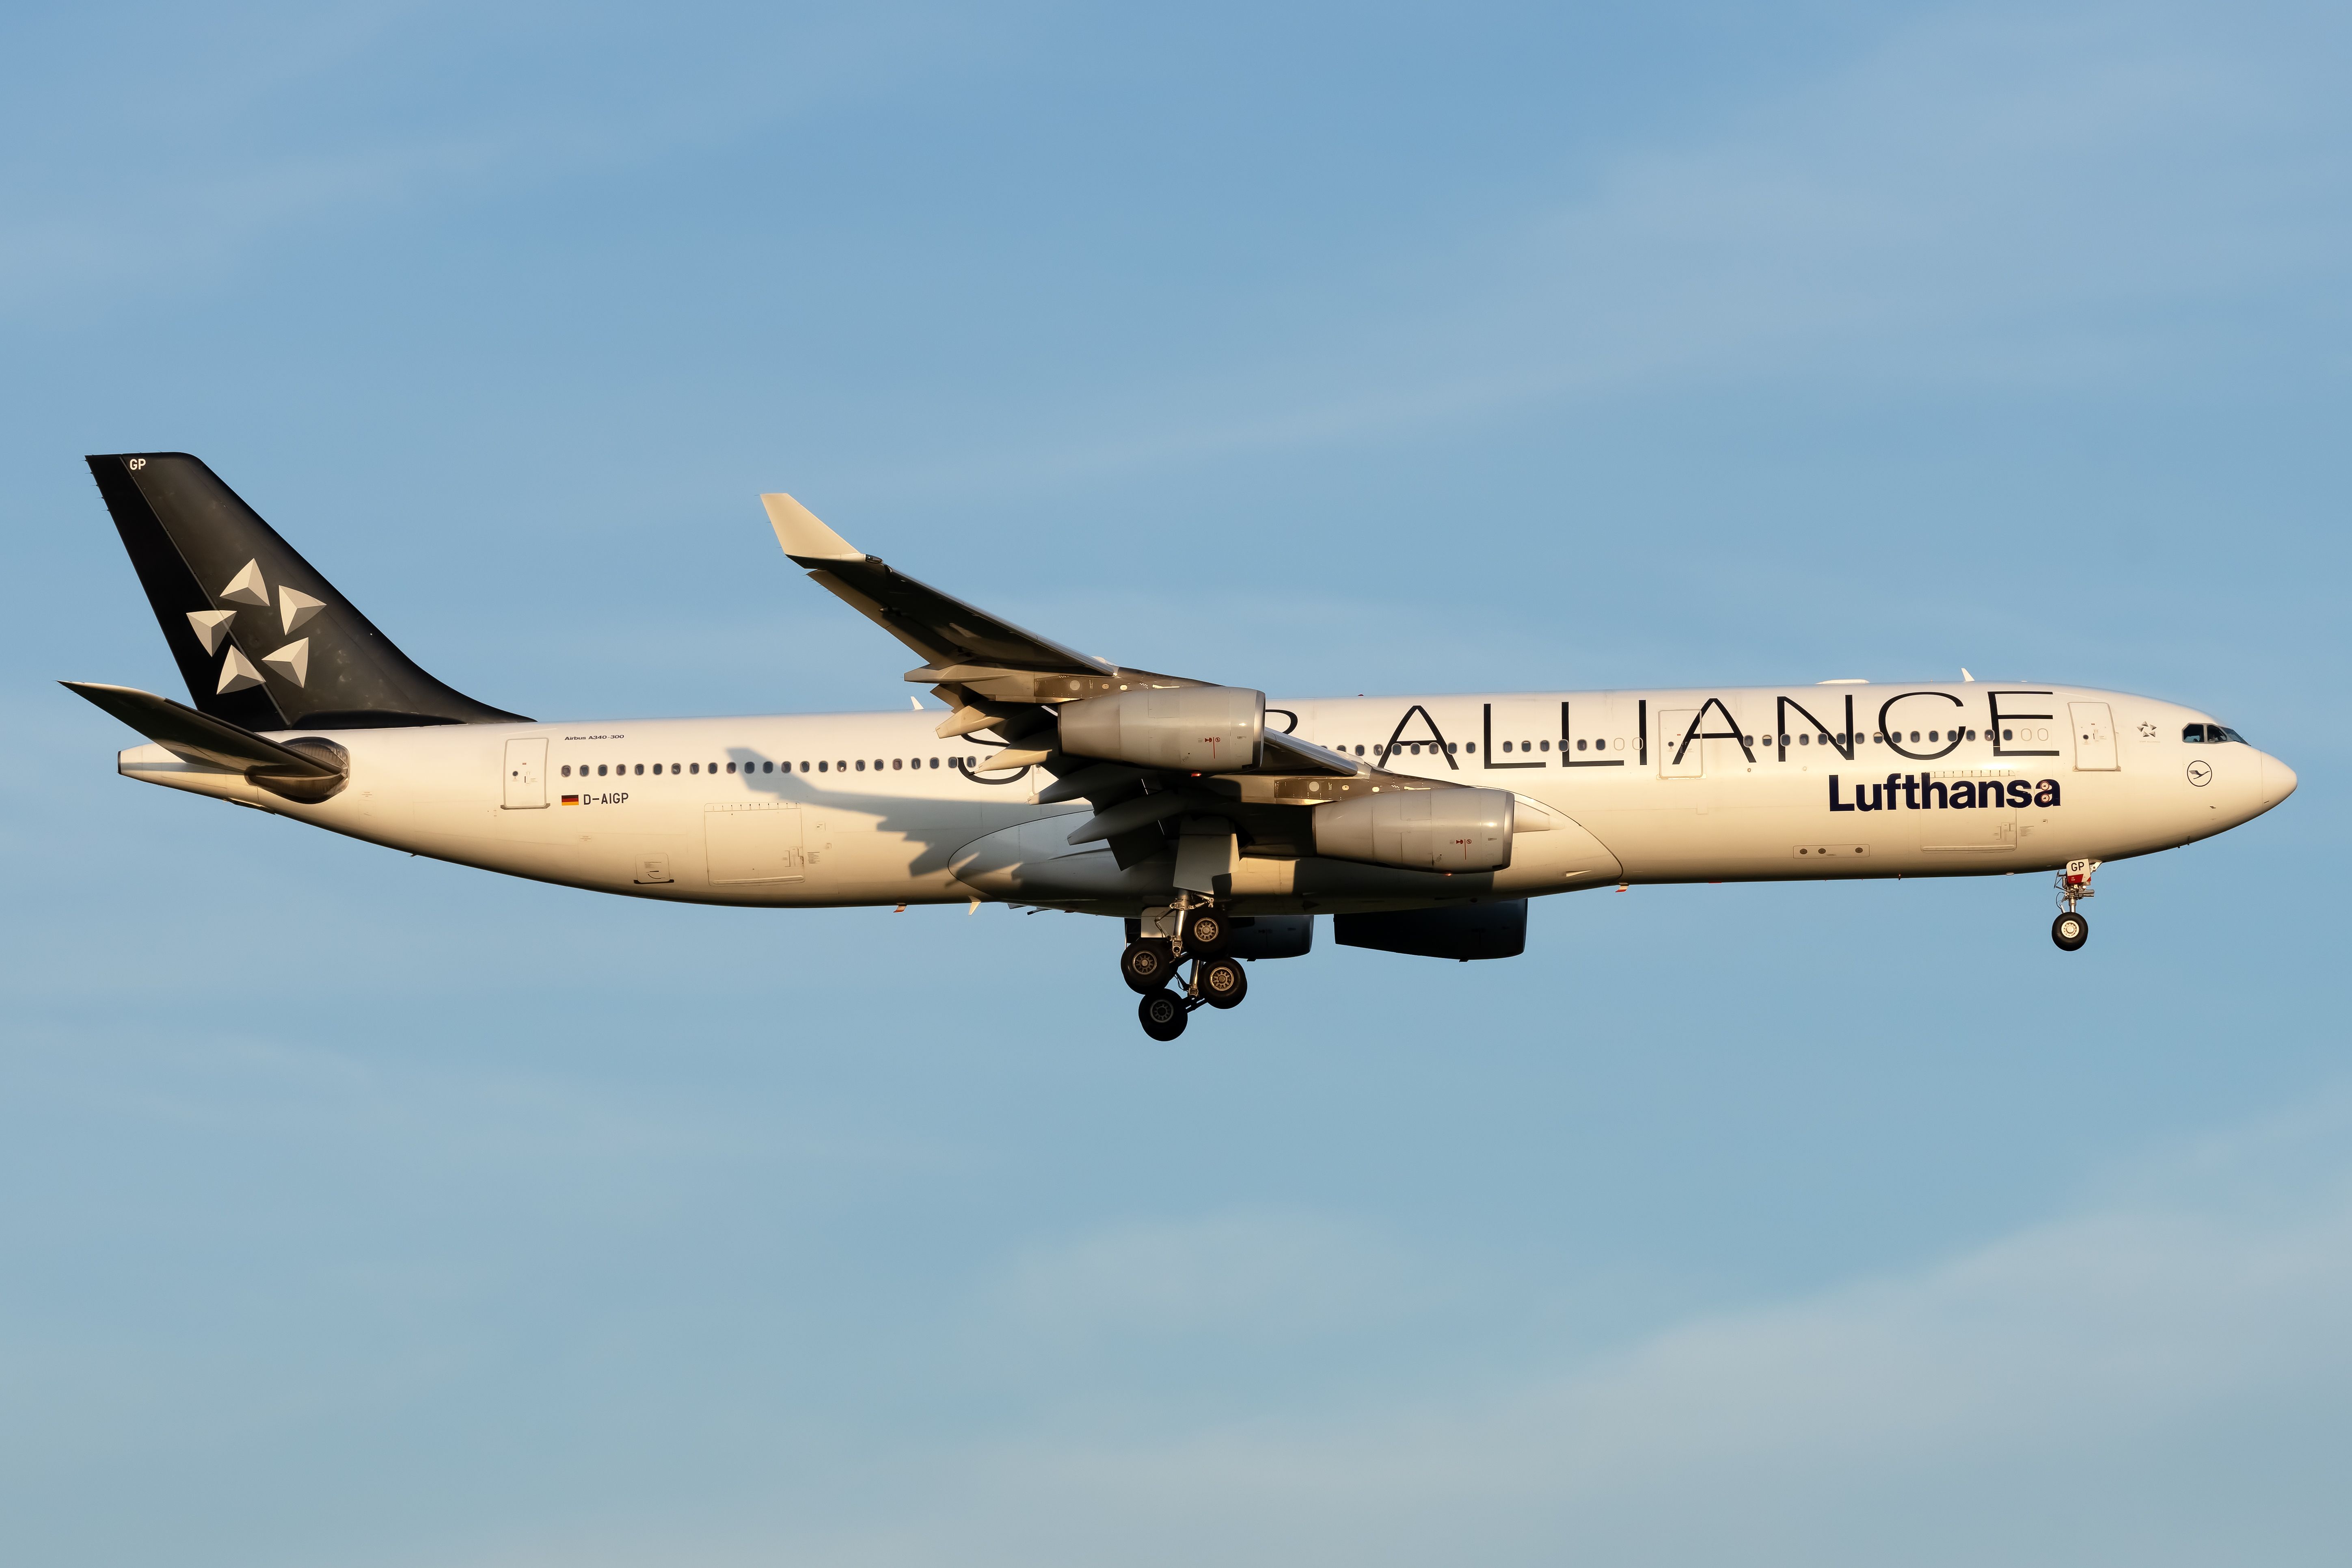 A Lufthansa Airbus A340-300 in Star Alliance livery flying in the sky.